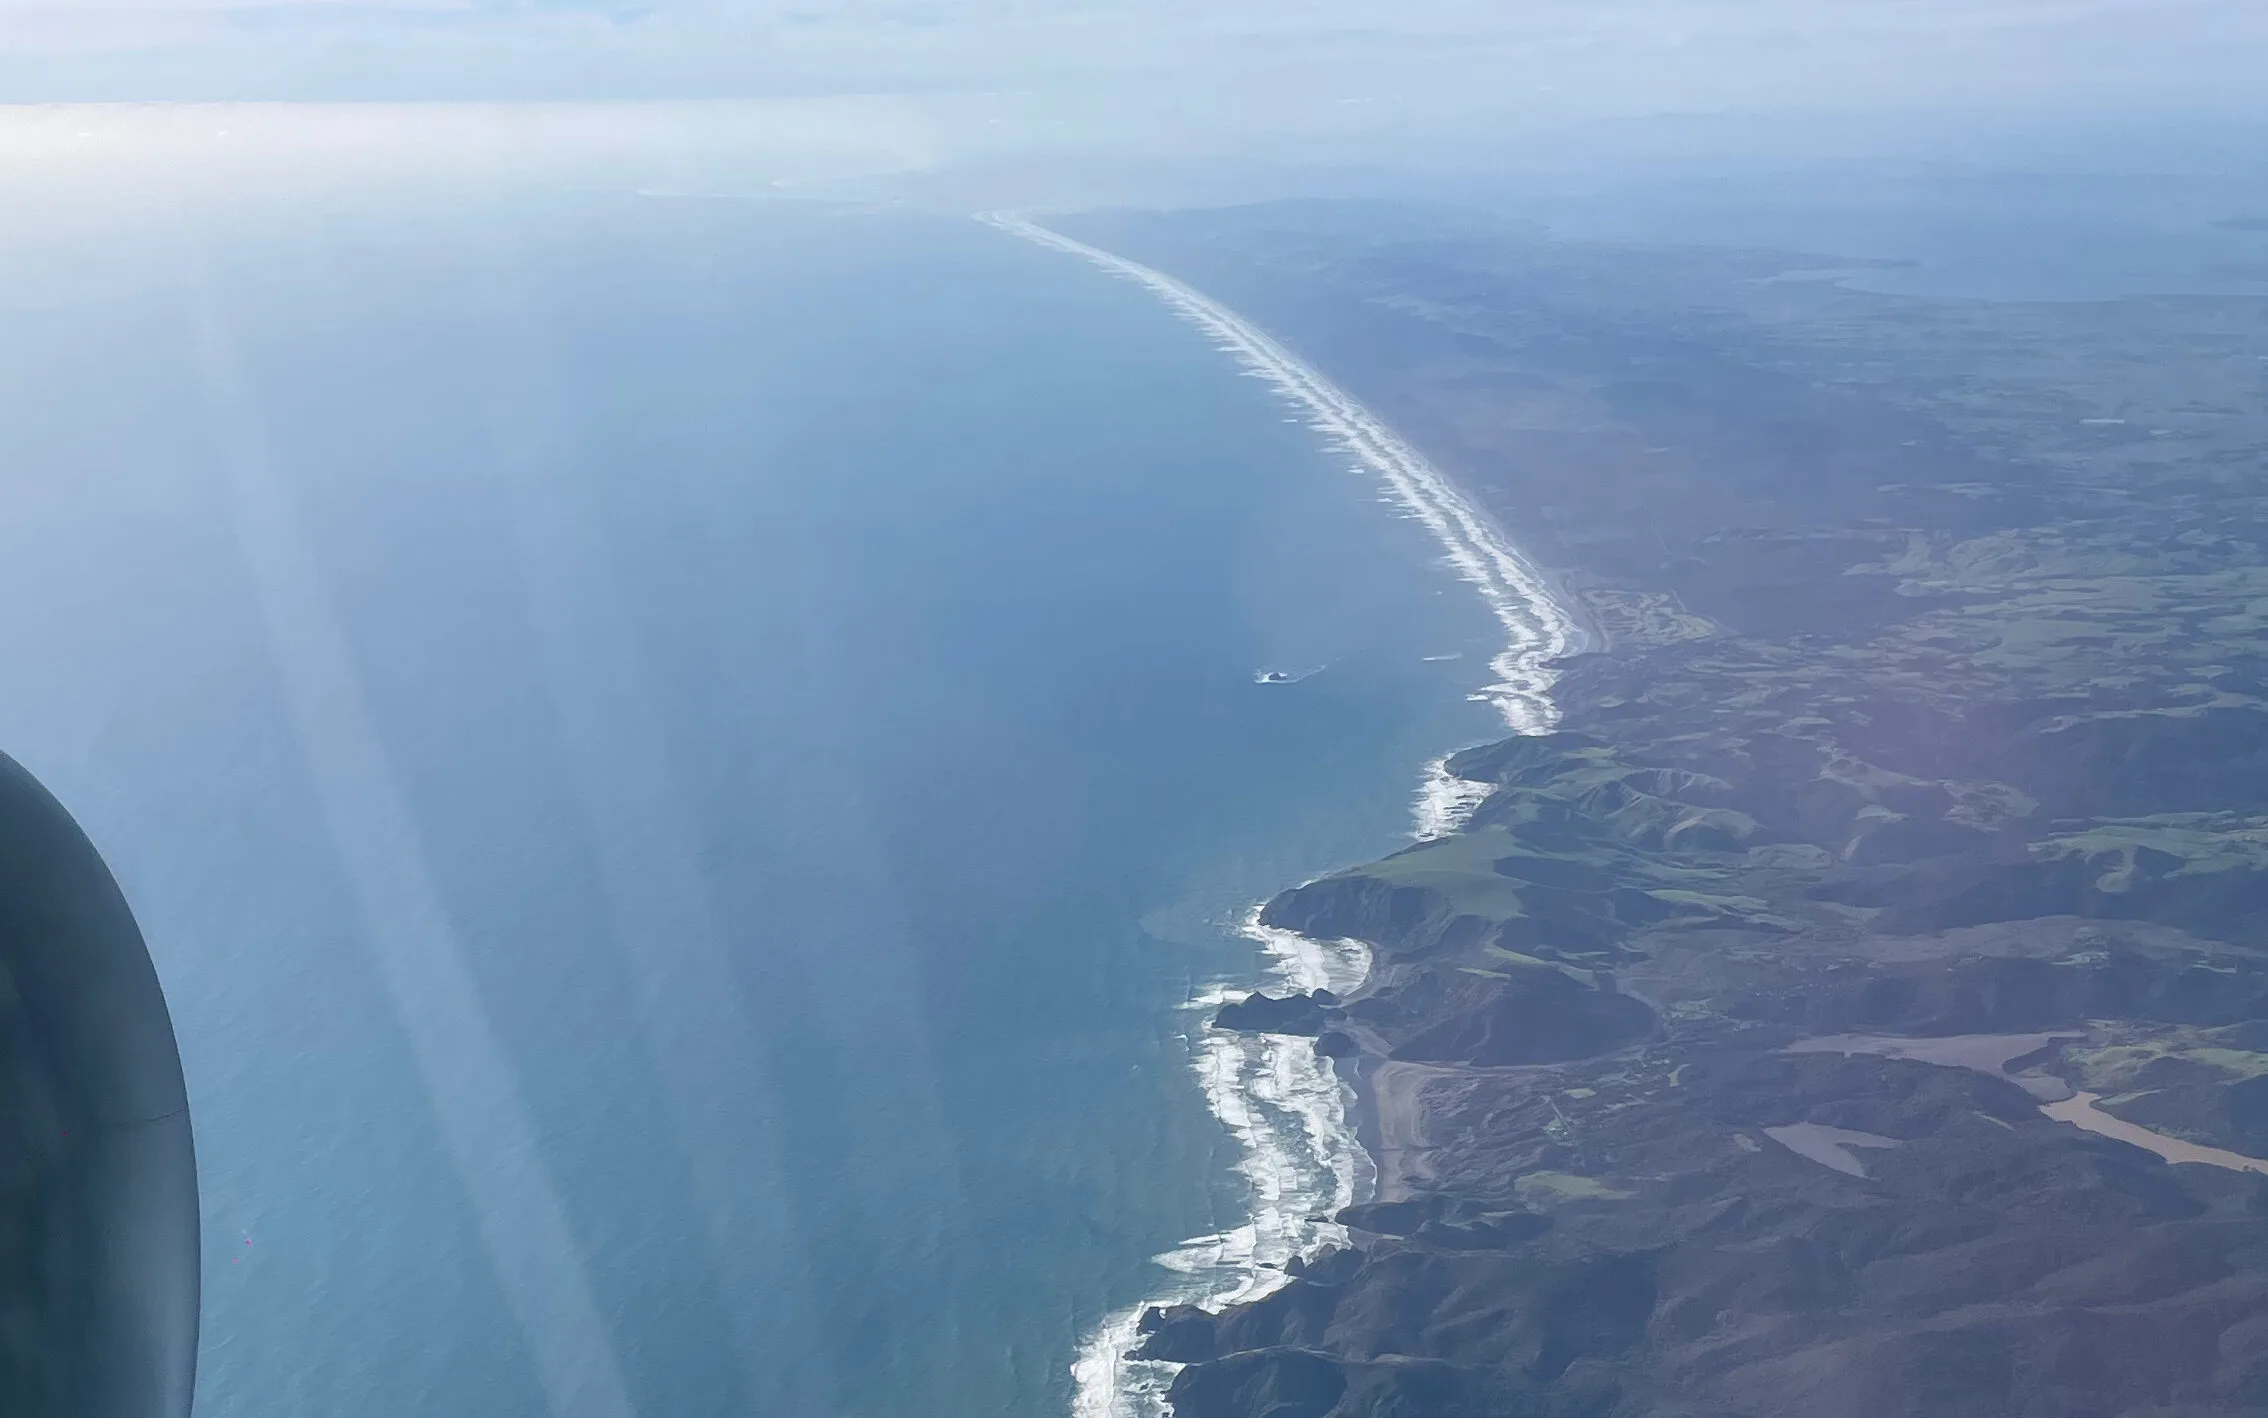 View of the West Coast of the North Island of New Zealand from an Airplane on approach into Auckland Airport